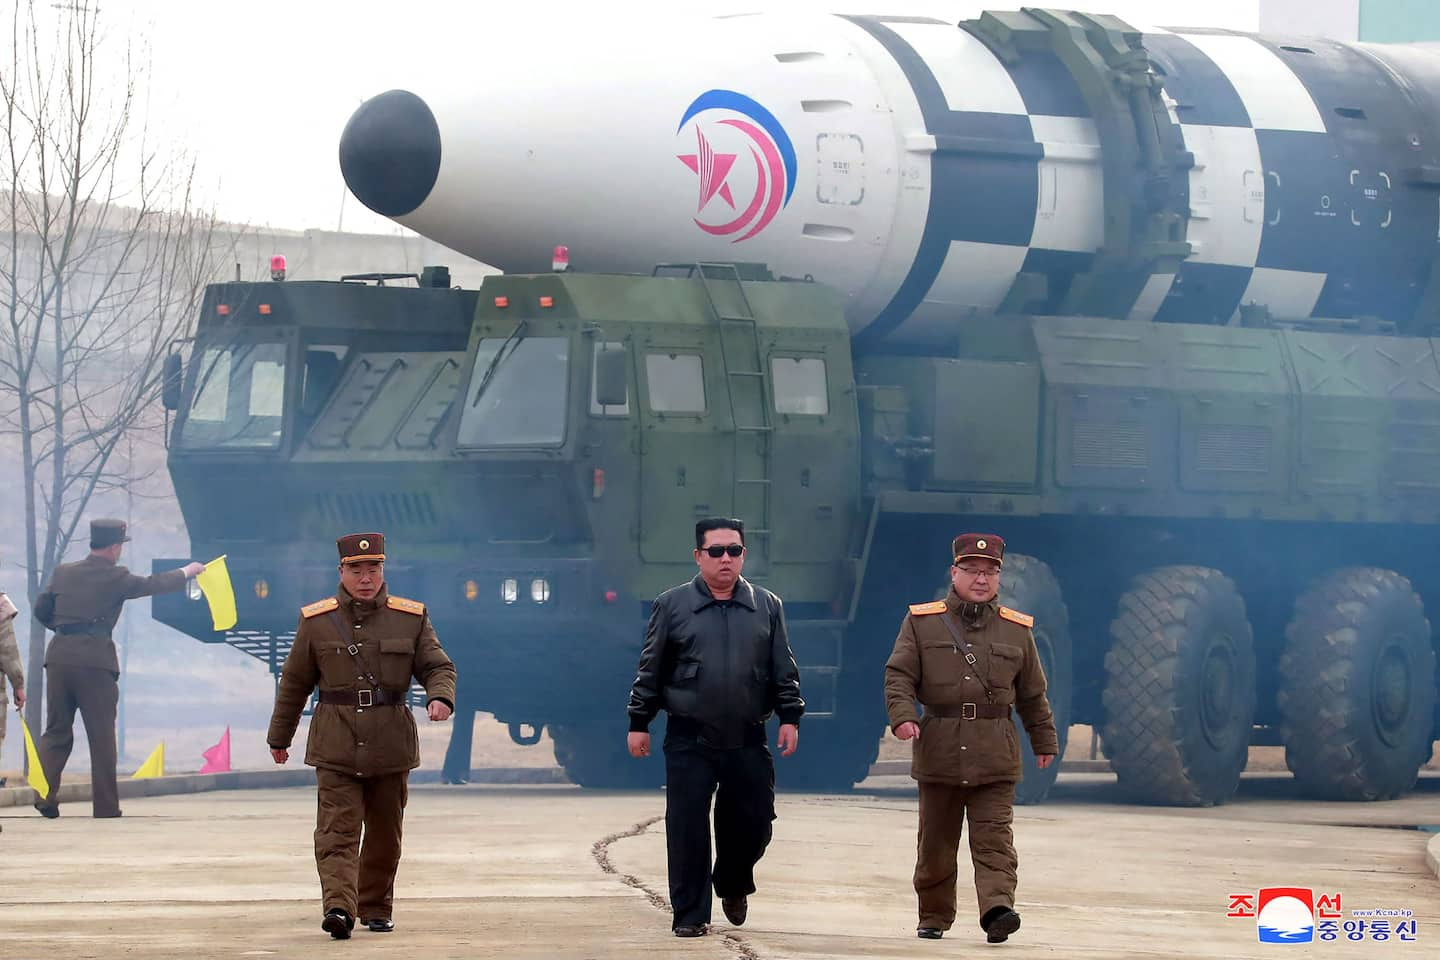 Here's how much North Korea's weapons tests cost